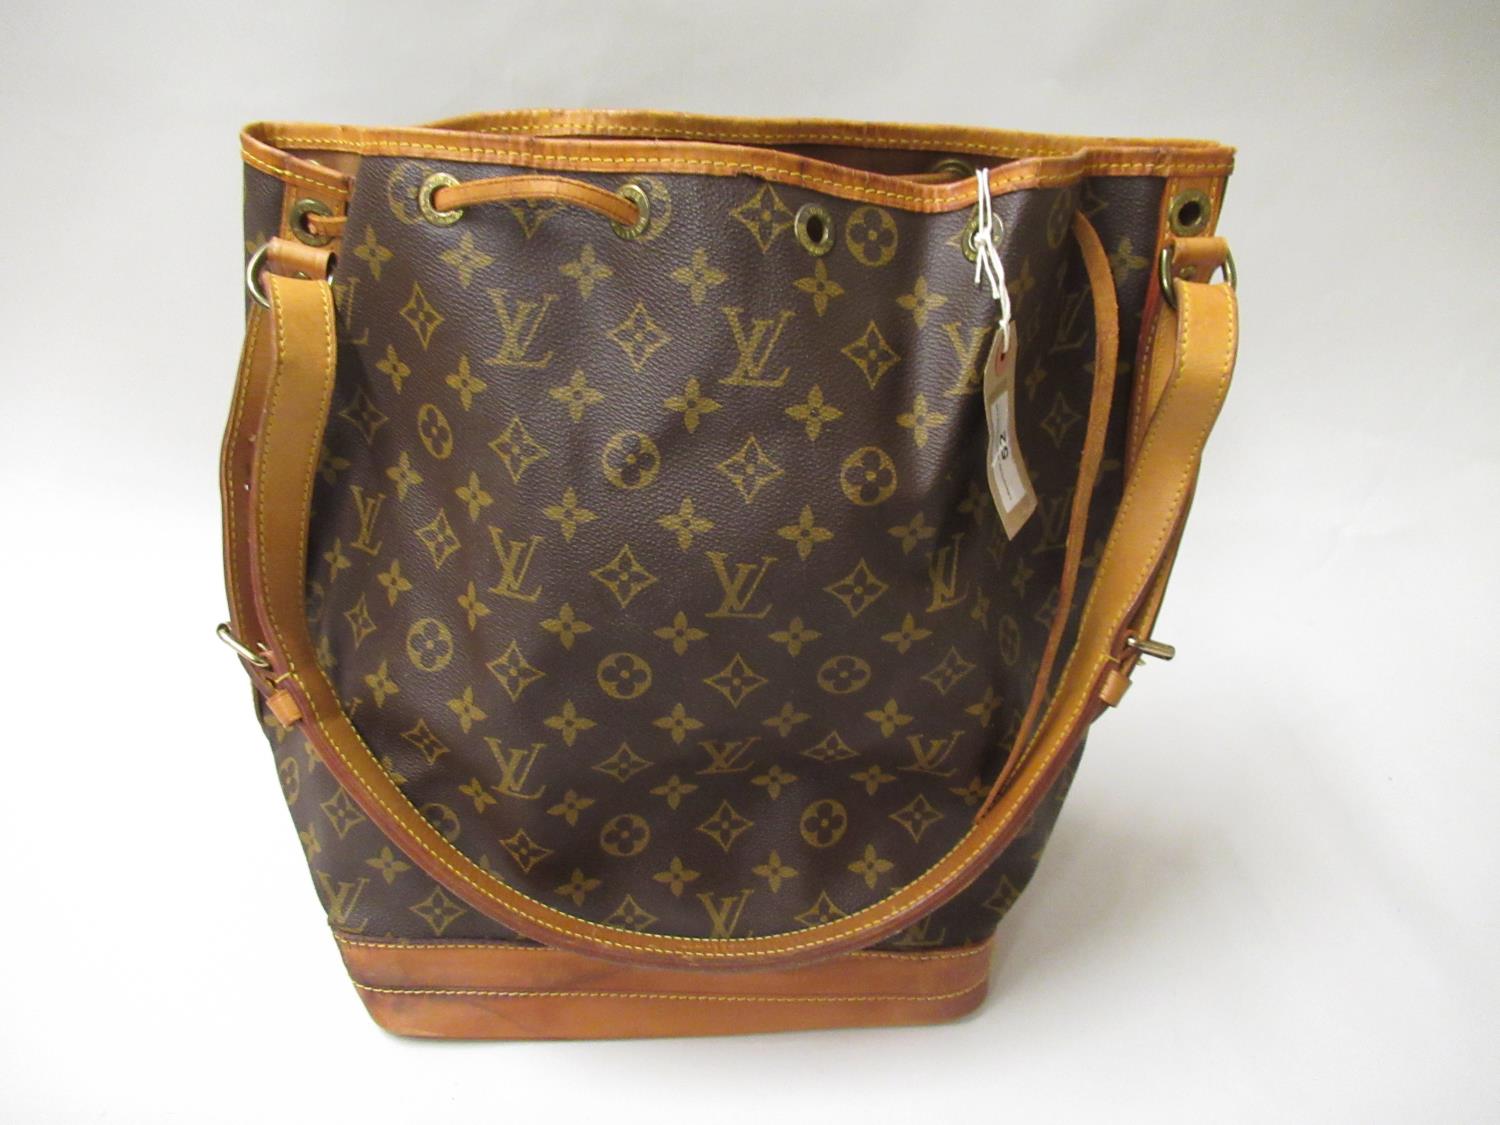 Louis Vuitton, ladies bucket bag with leather strap and leather tie top Some staining to base and